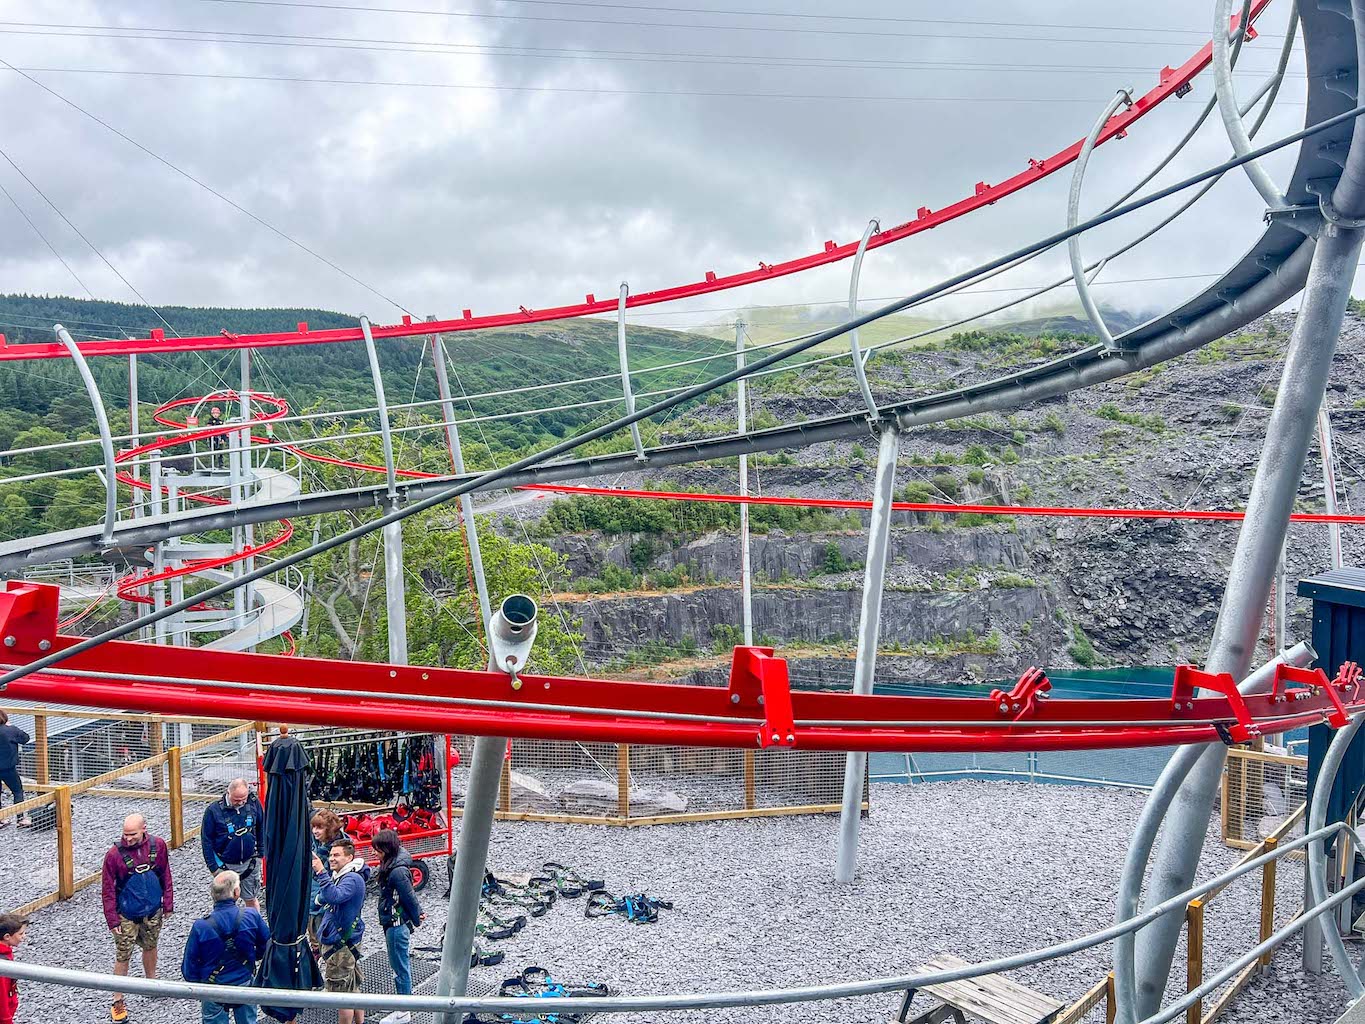 places to visit north Wales, zip world Penrhyn quarry aero explorer ride